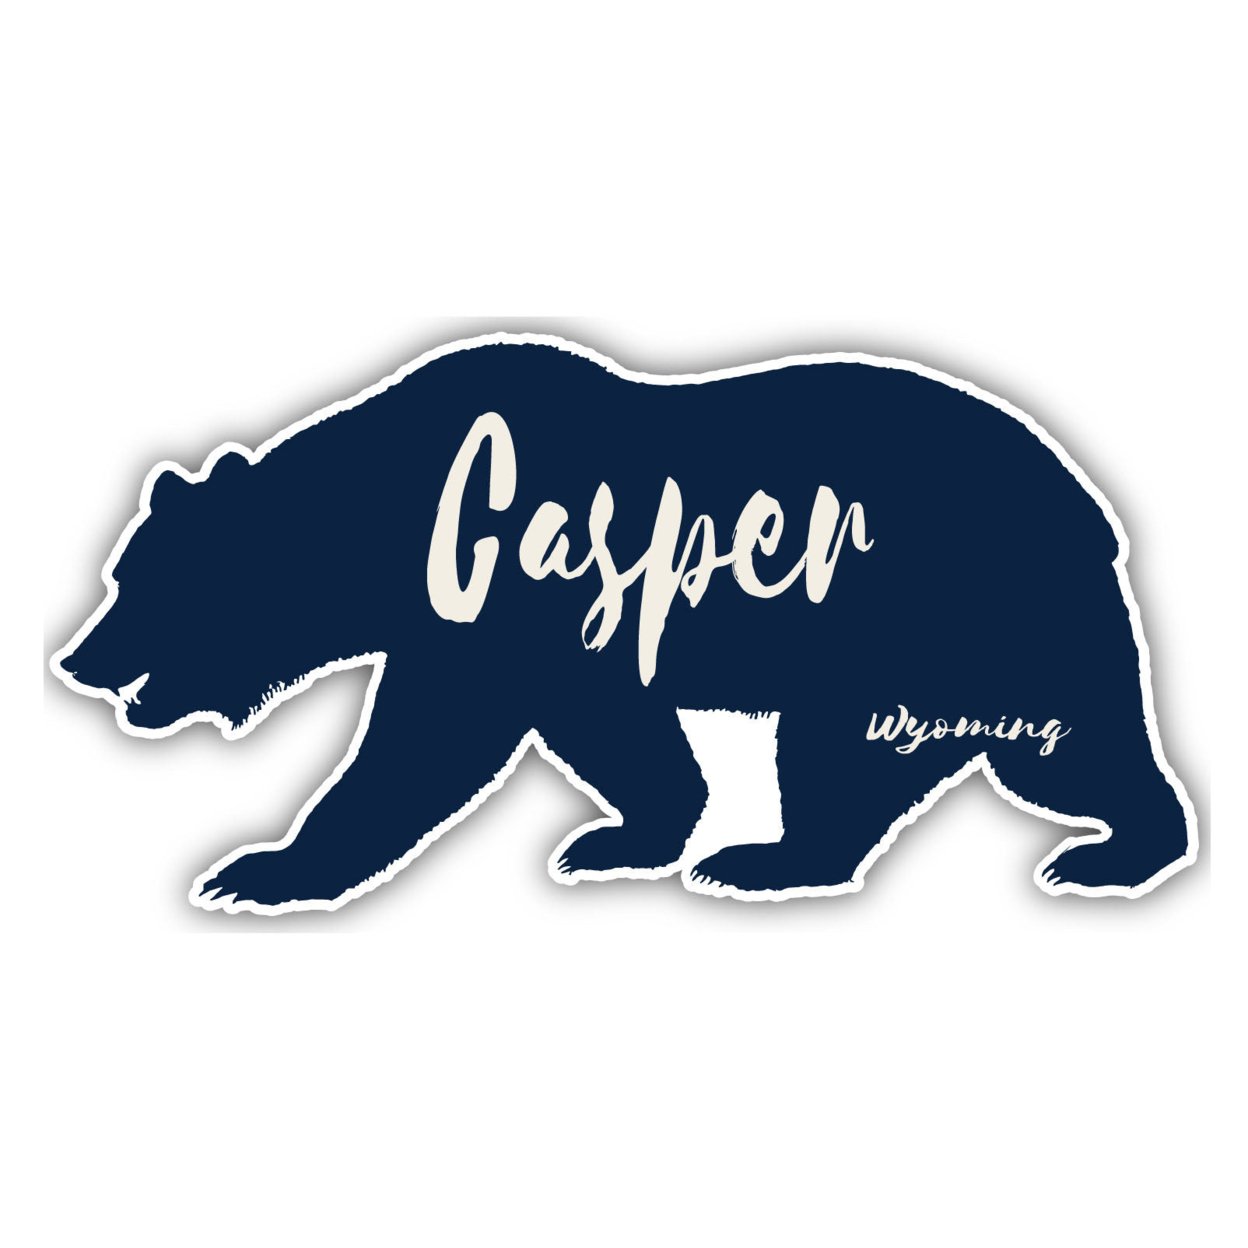 Casper Wyoming Souvenir Decorative Stickers (Choose Theme And Size) - 4-Pack, 12-Inch, Tent